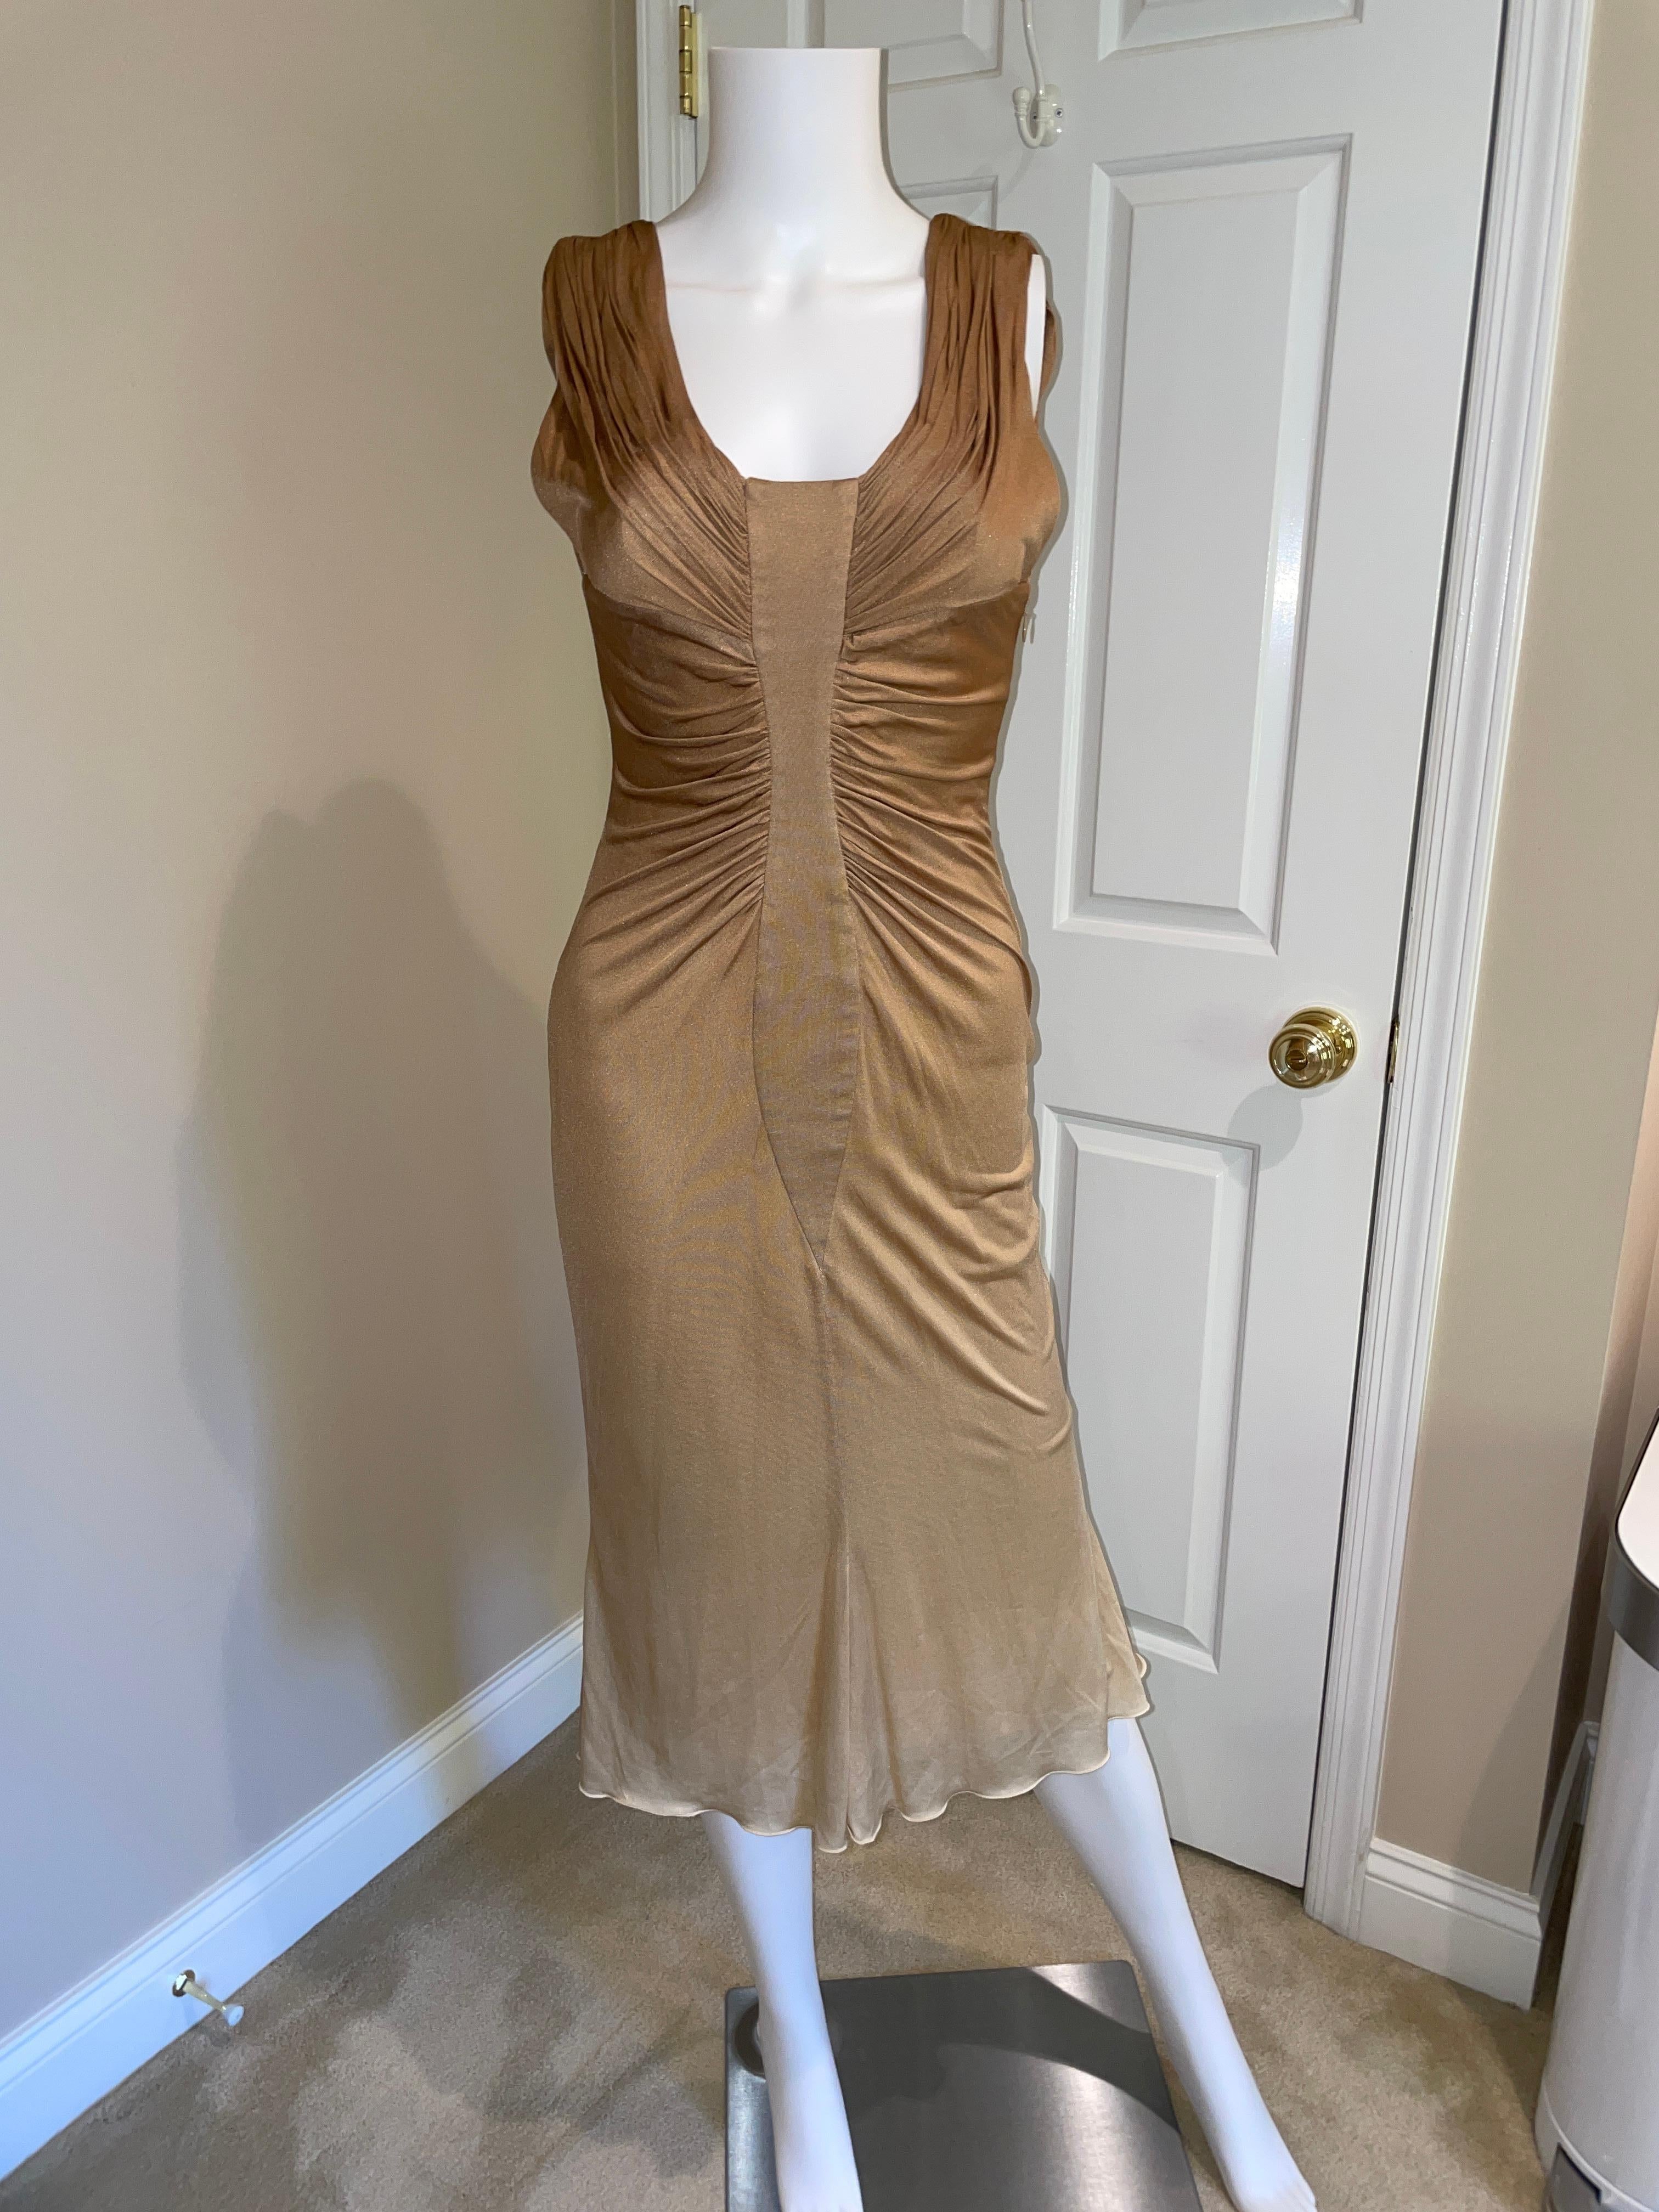 Vintage Versace ruched dress size IT40. Excellent vintage condition, very minor signs of wear including some nubbies and an almost impossible to see stain on the side towards the bottom. 100% silk (has stretch) from the SS06 runway. Starts at tan